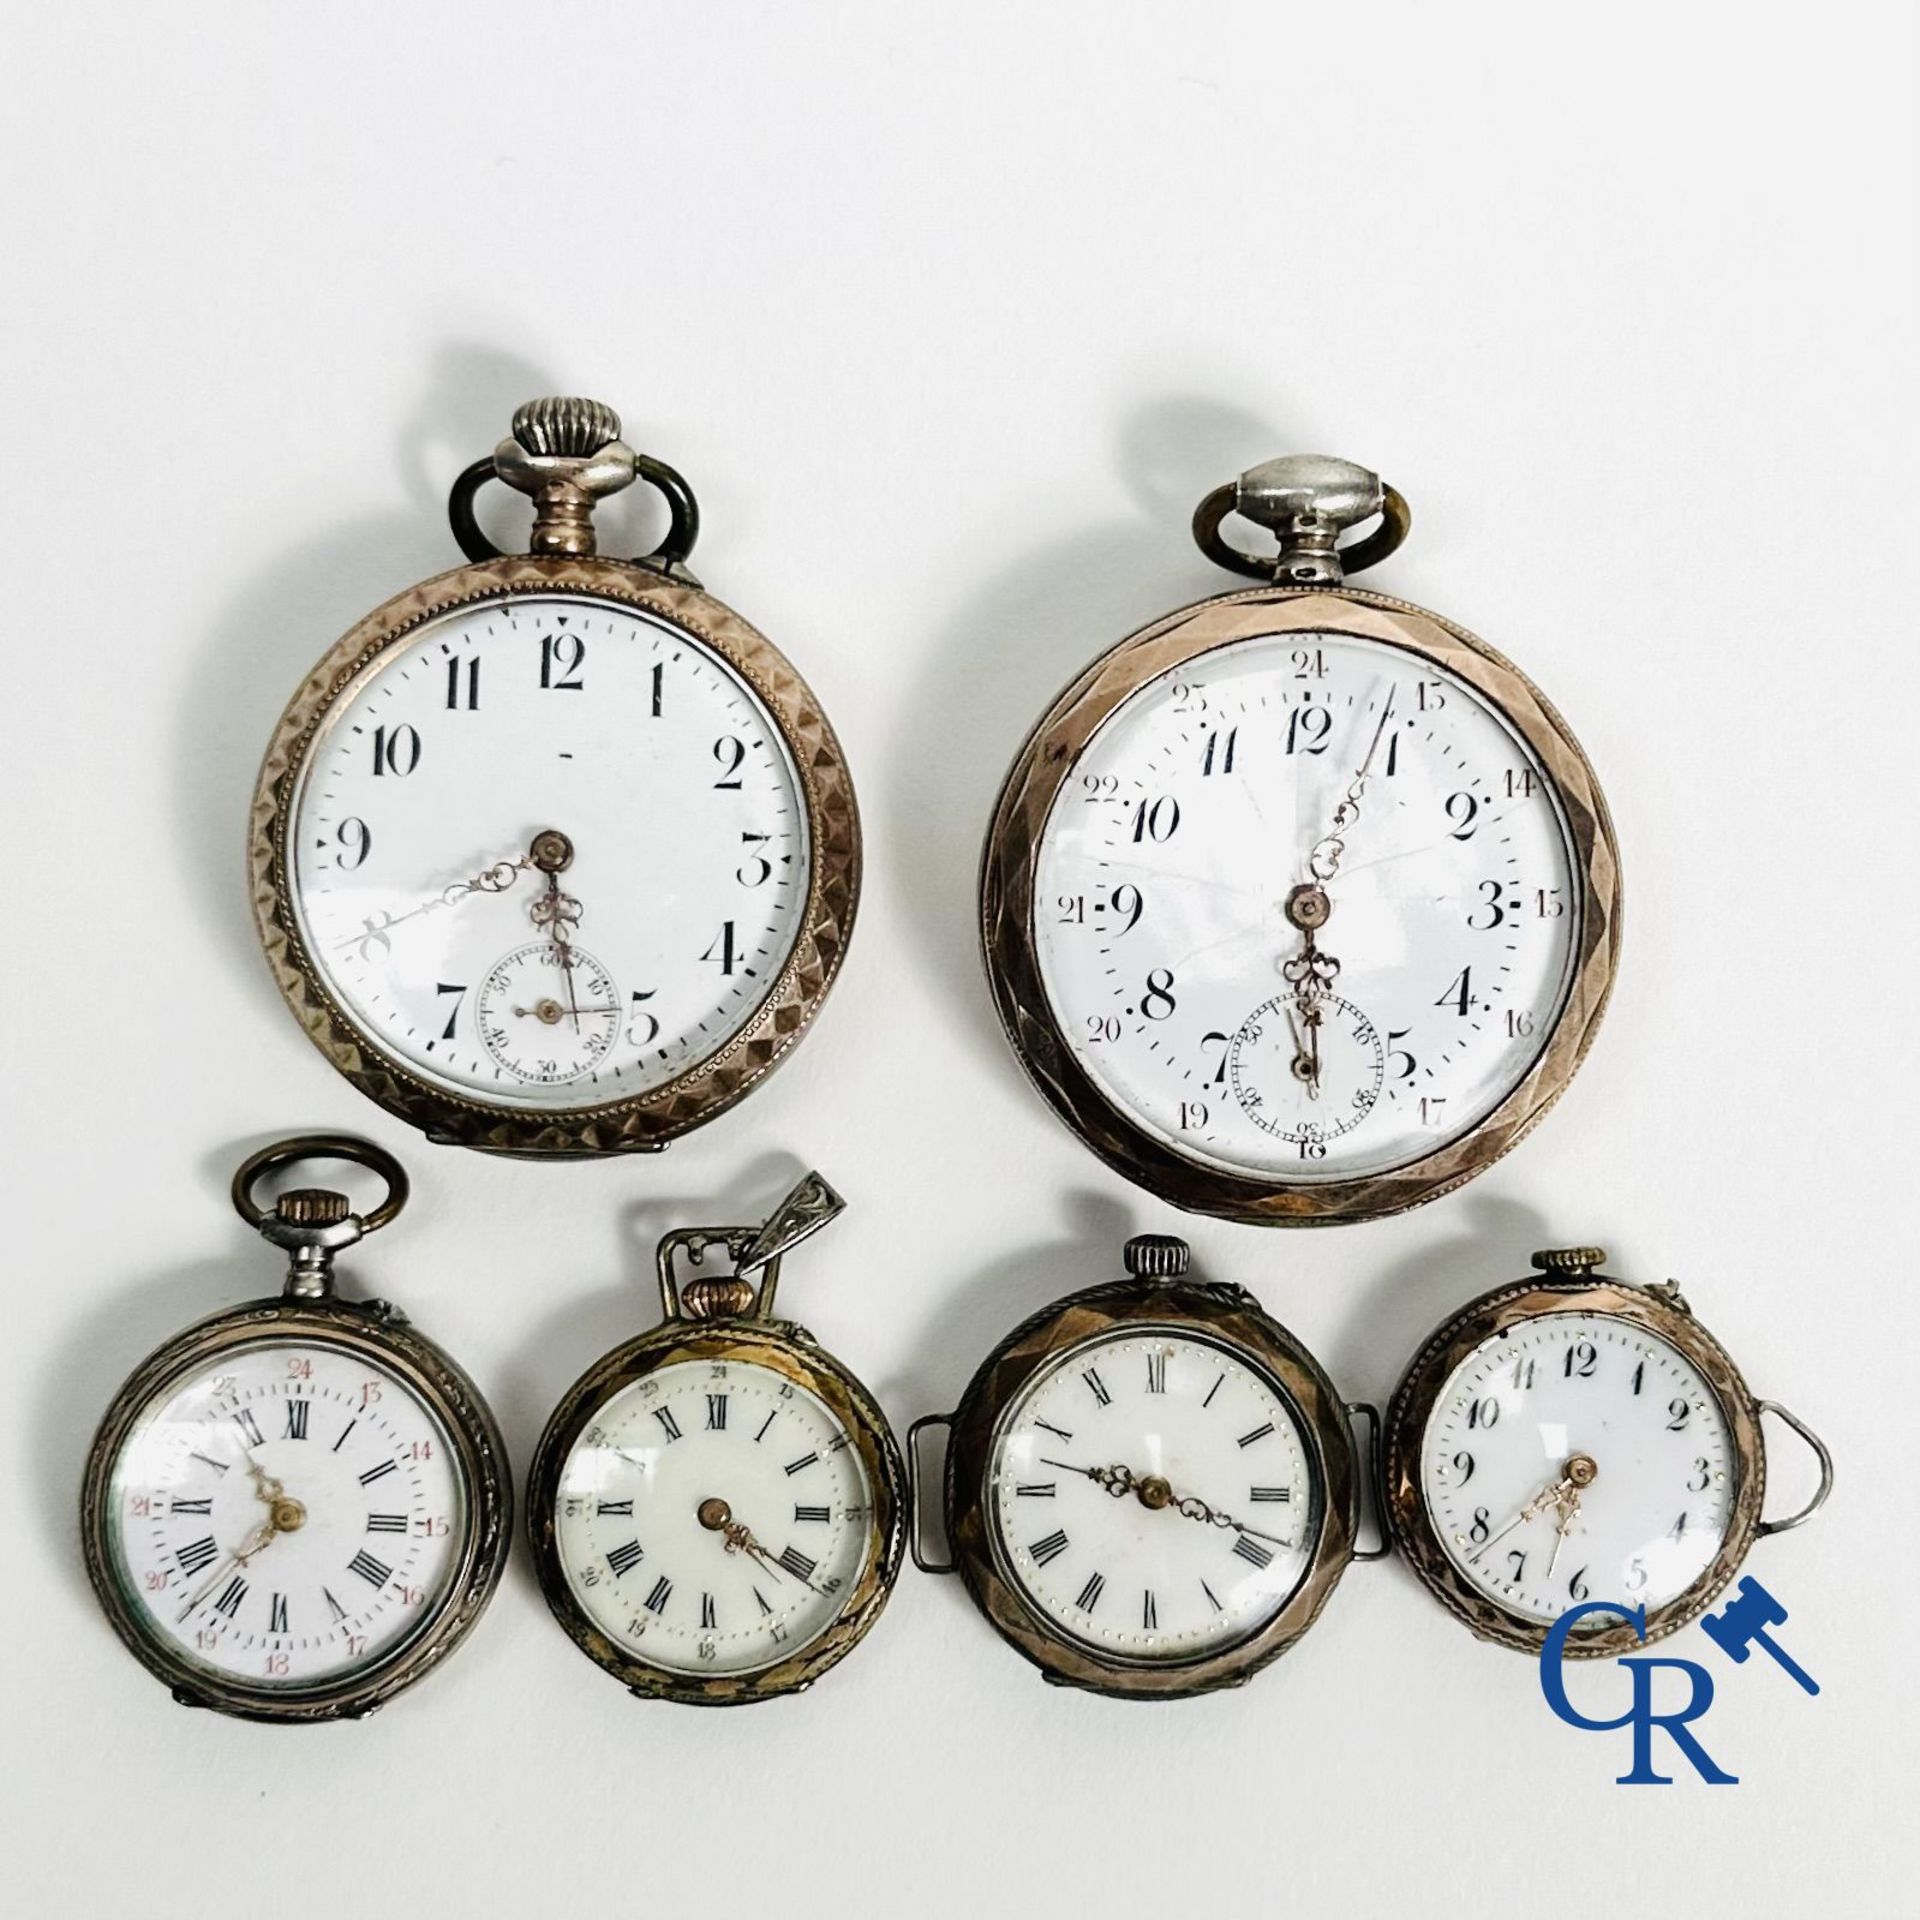 Watches: Lot consisting of 2 pocket watches and 4 ladies watches in silver (800°/00)